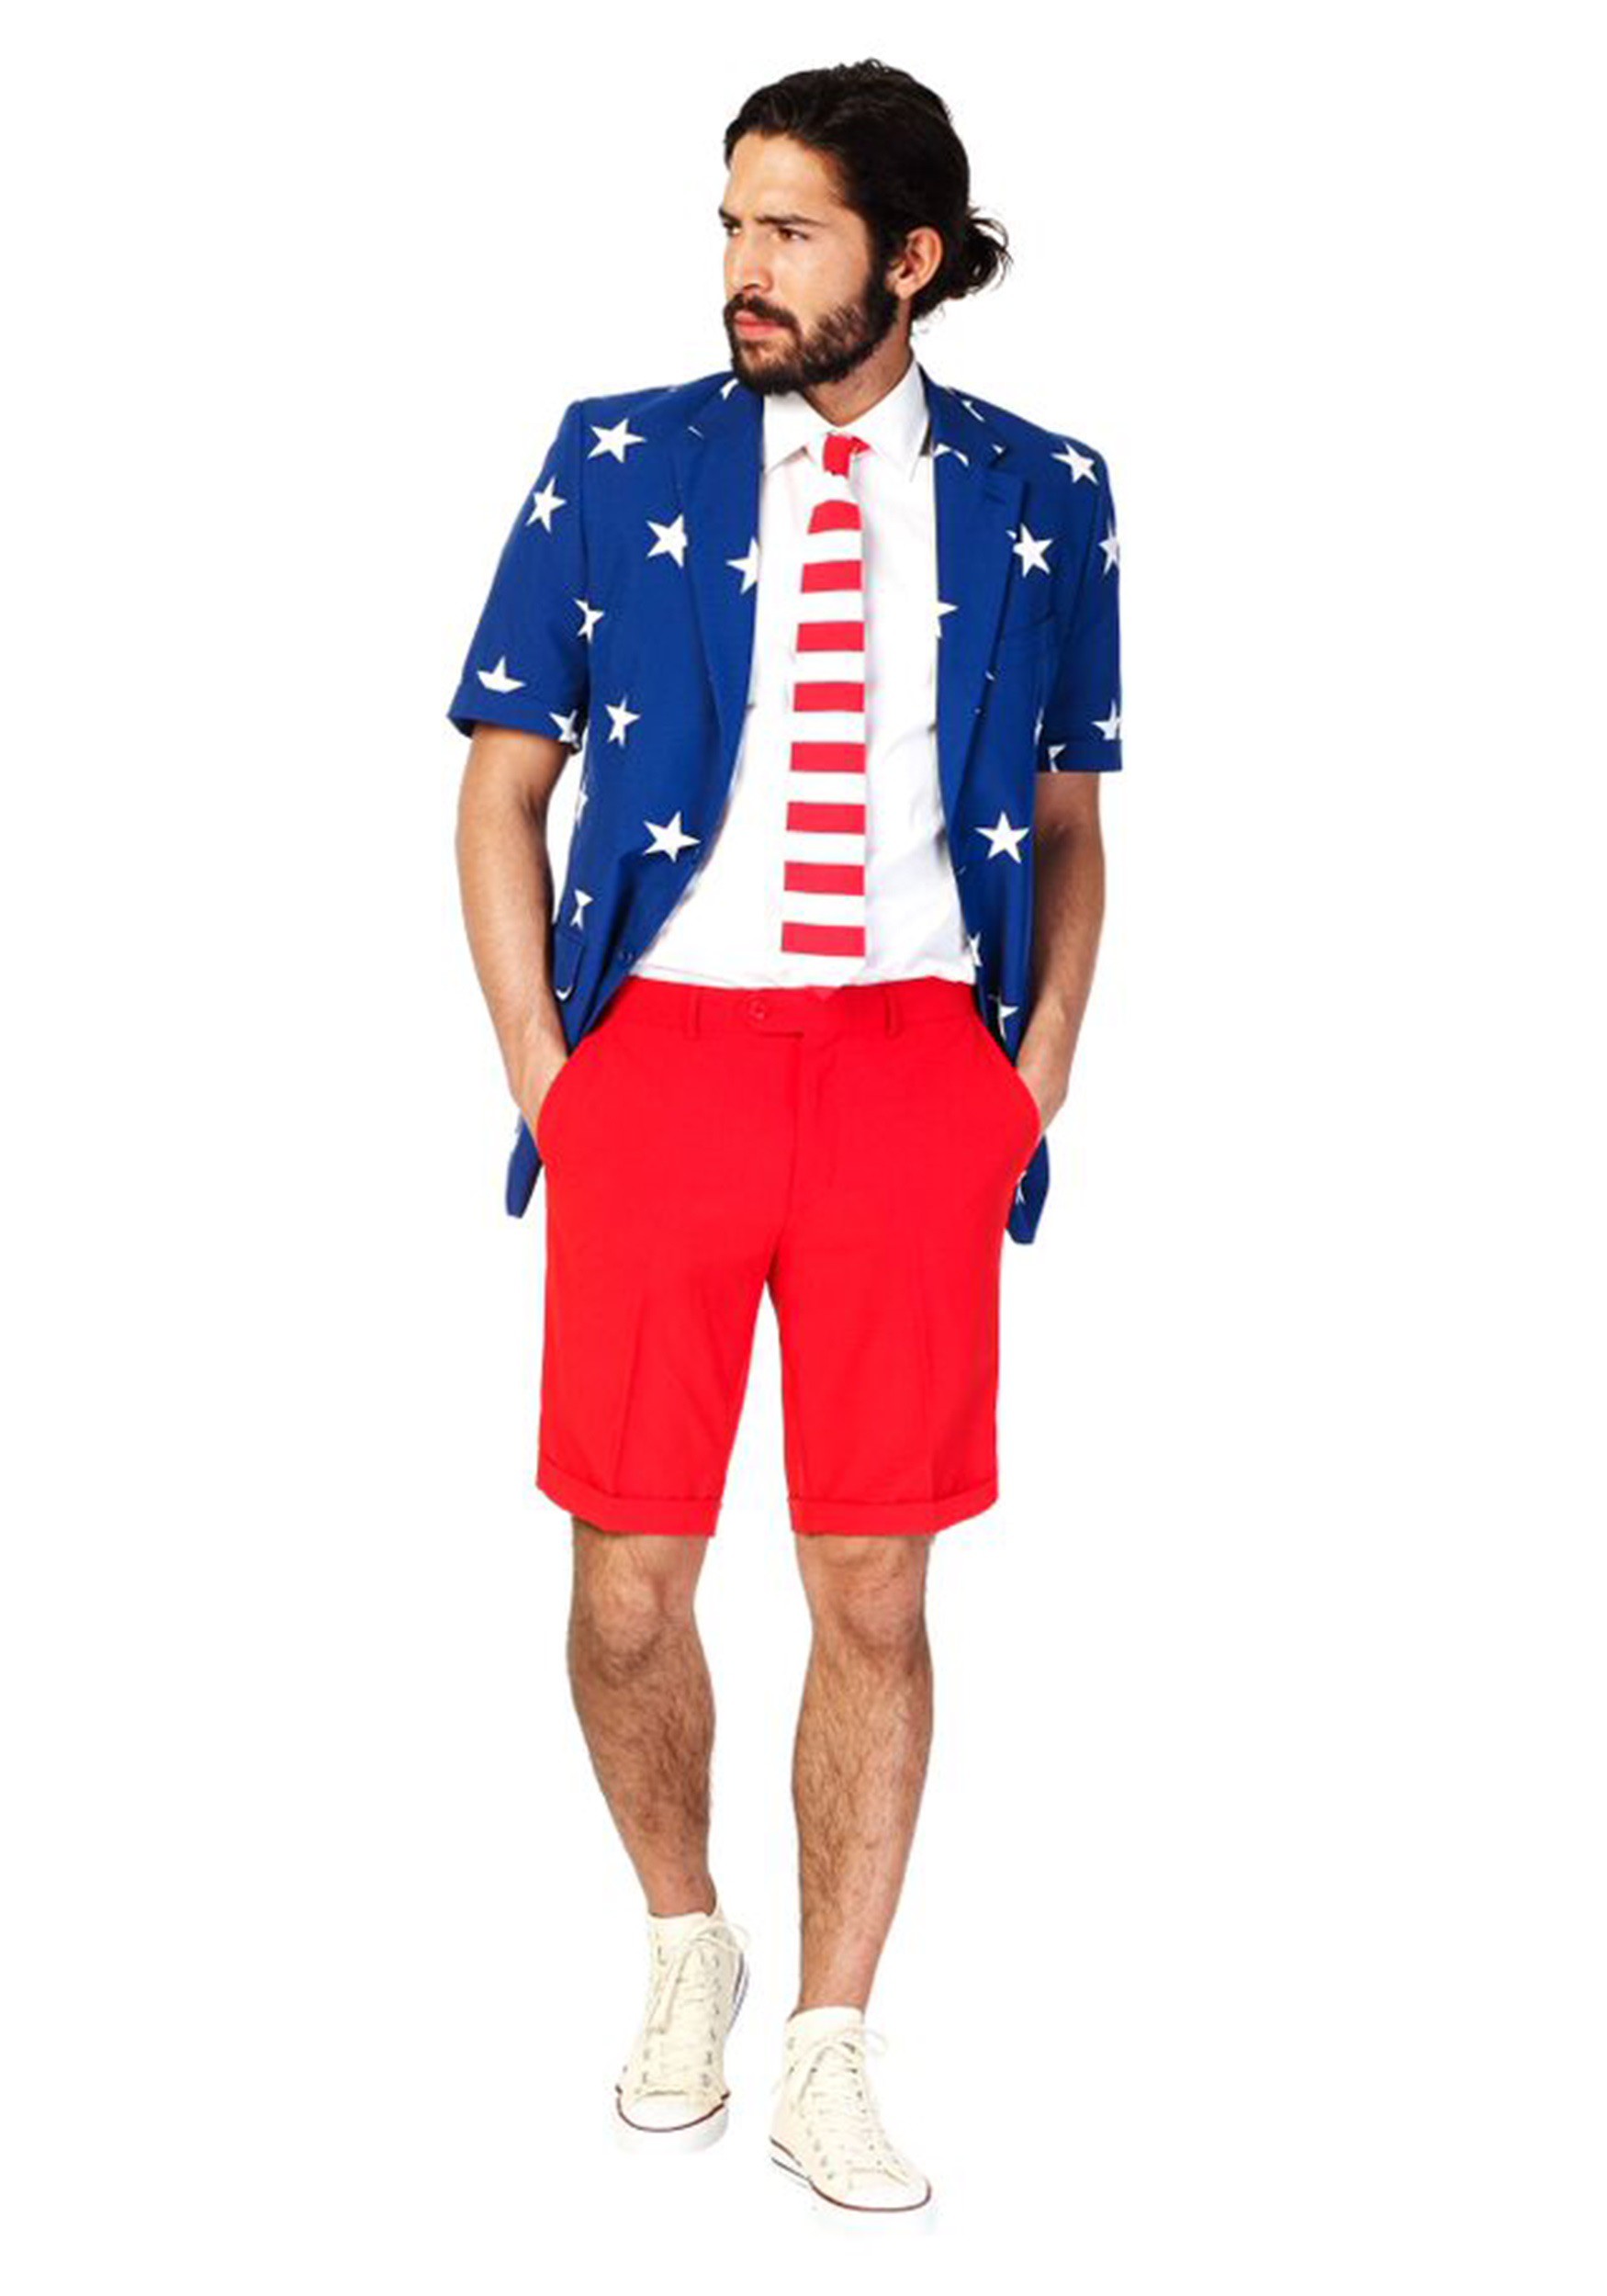 Image of OppoSuits Stars & Stripes Summer Suit Men's Costume ID OSOSUM0006-42